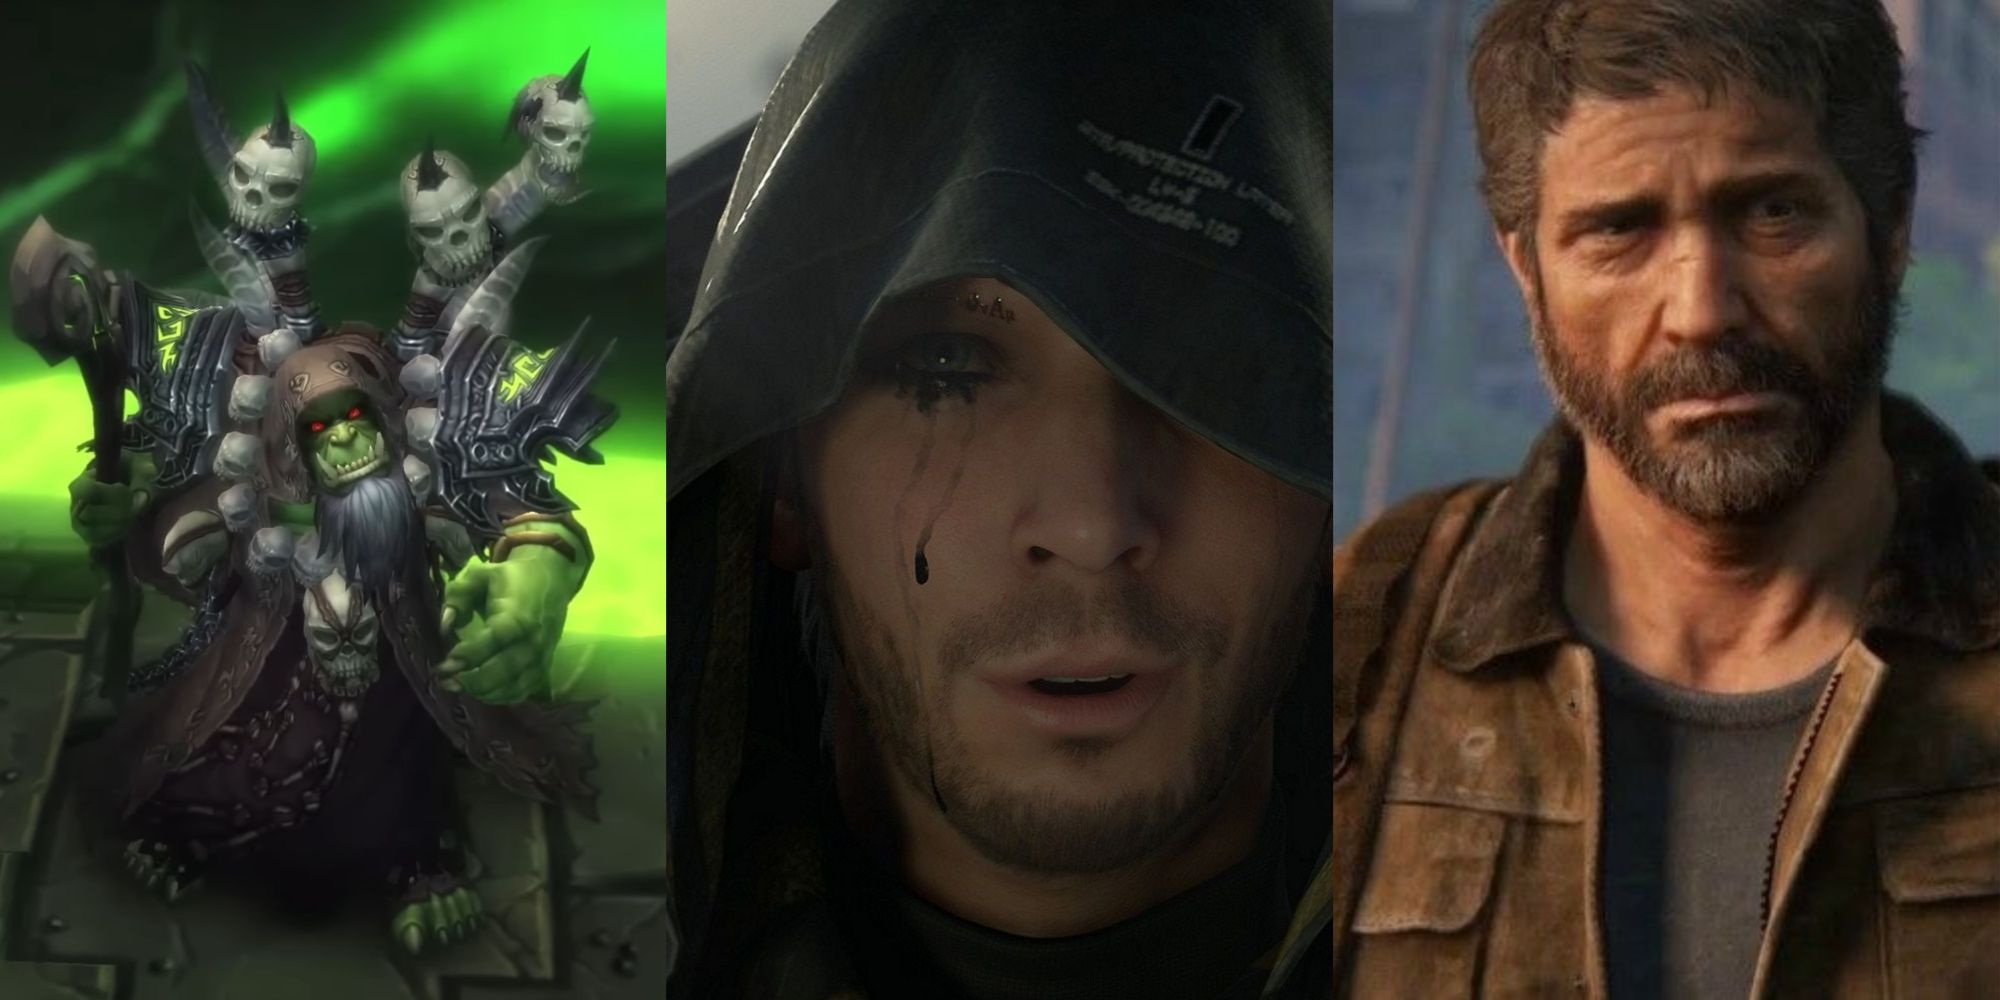 Split image collage featuring Troy Baker's character Gul'dan in World of Warcraft, the antagonist Higgs Monaghan in Death Stranding, and Joel Miller in The Last of Us Part 1.